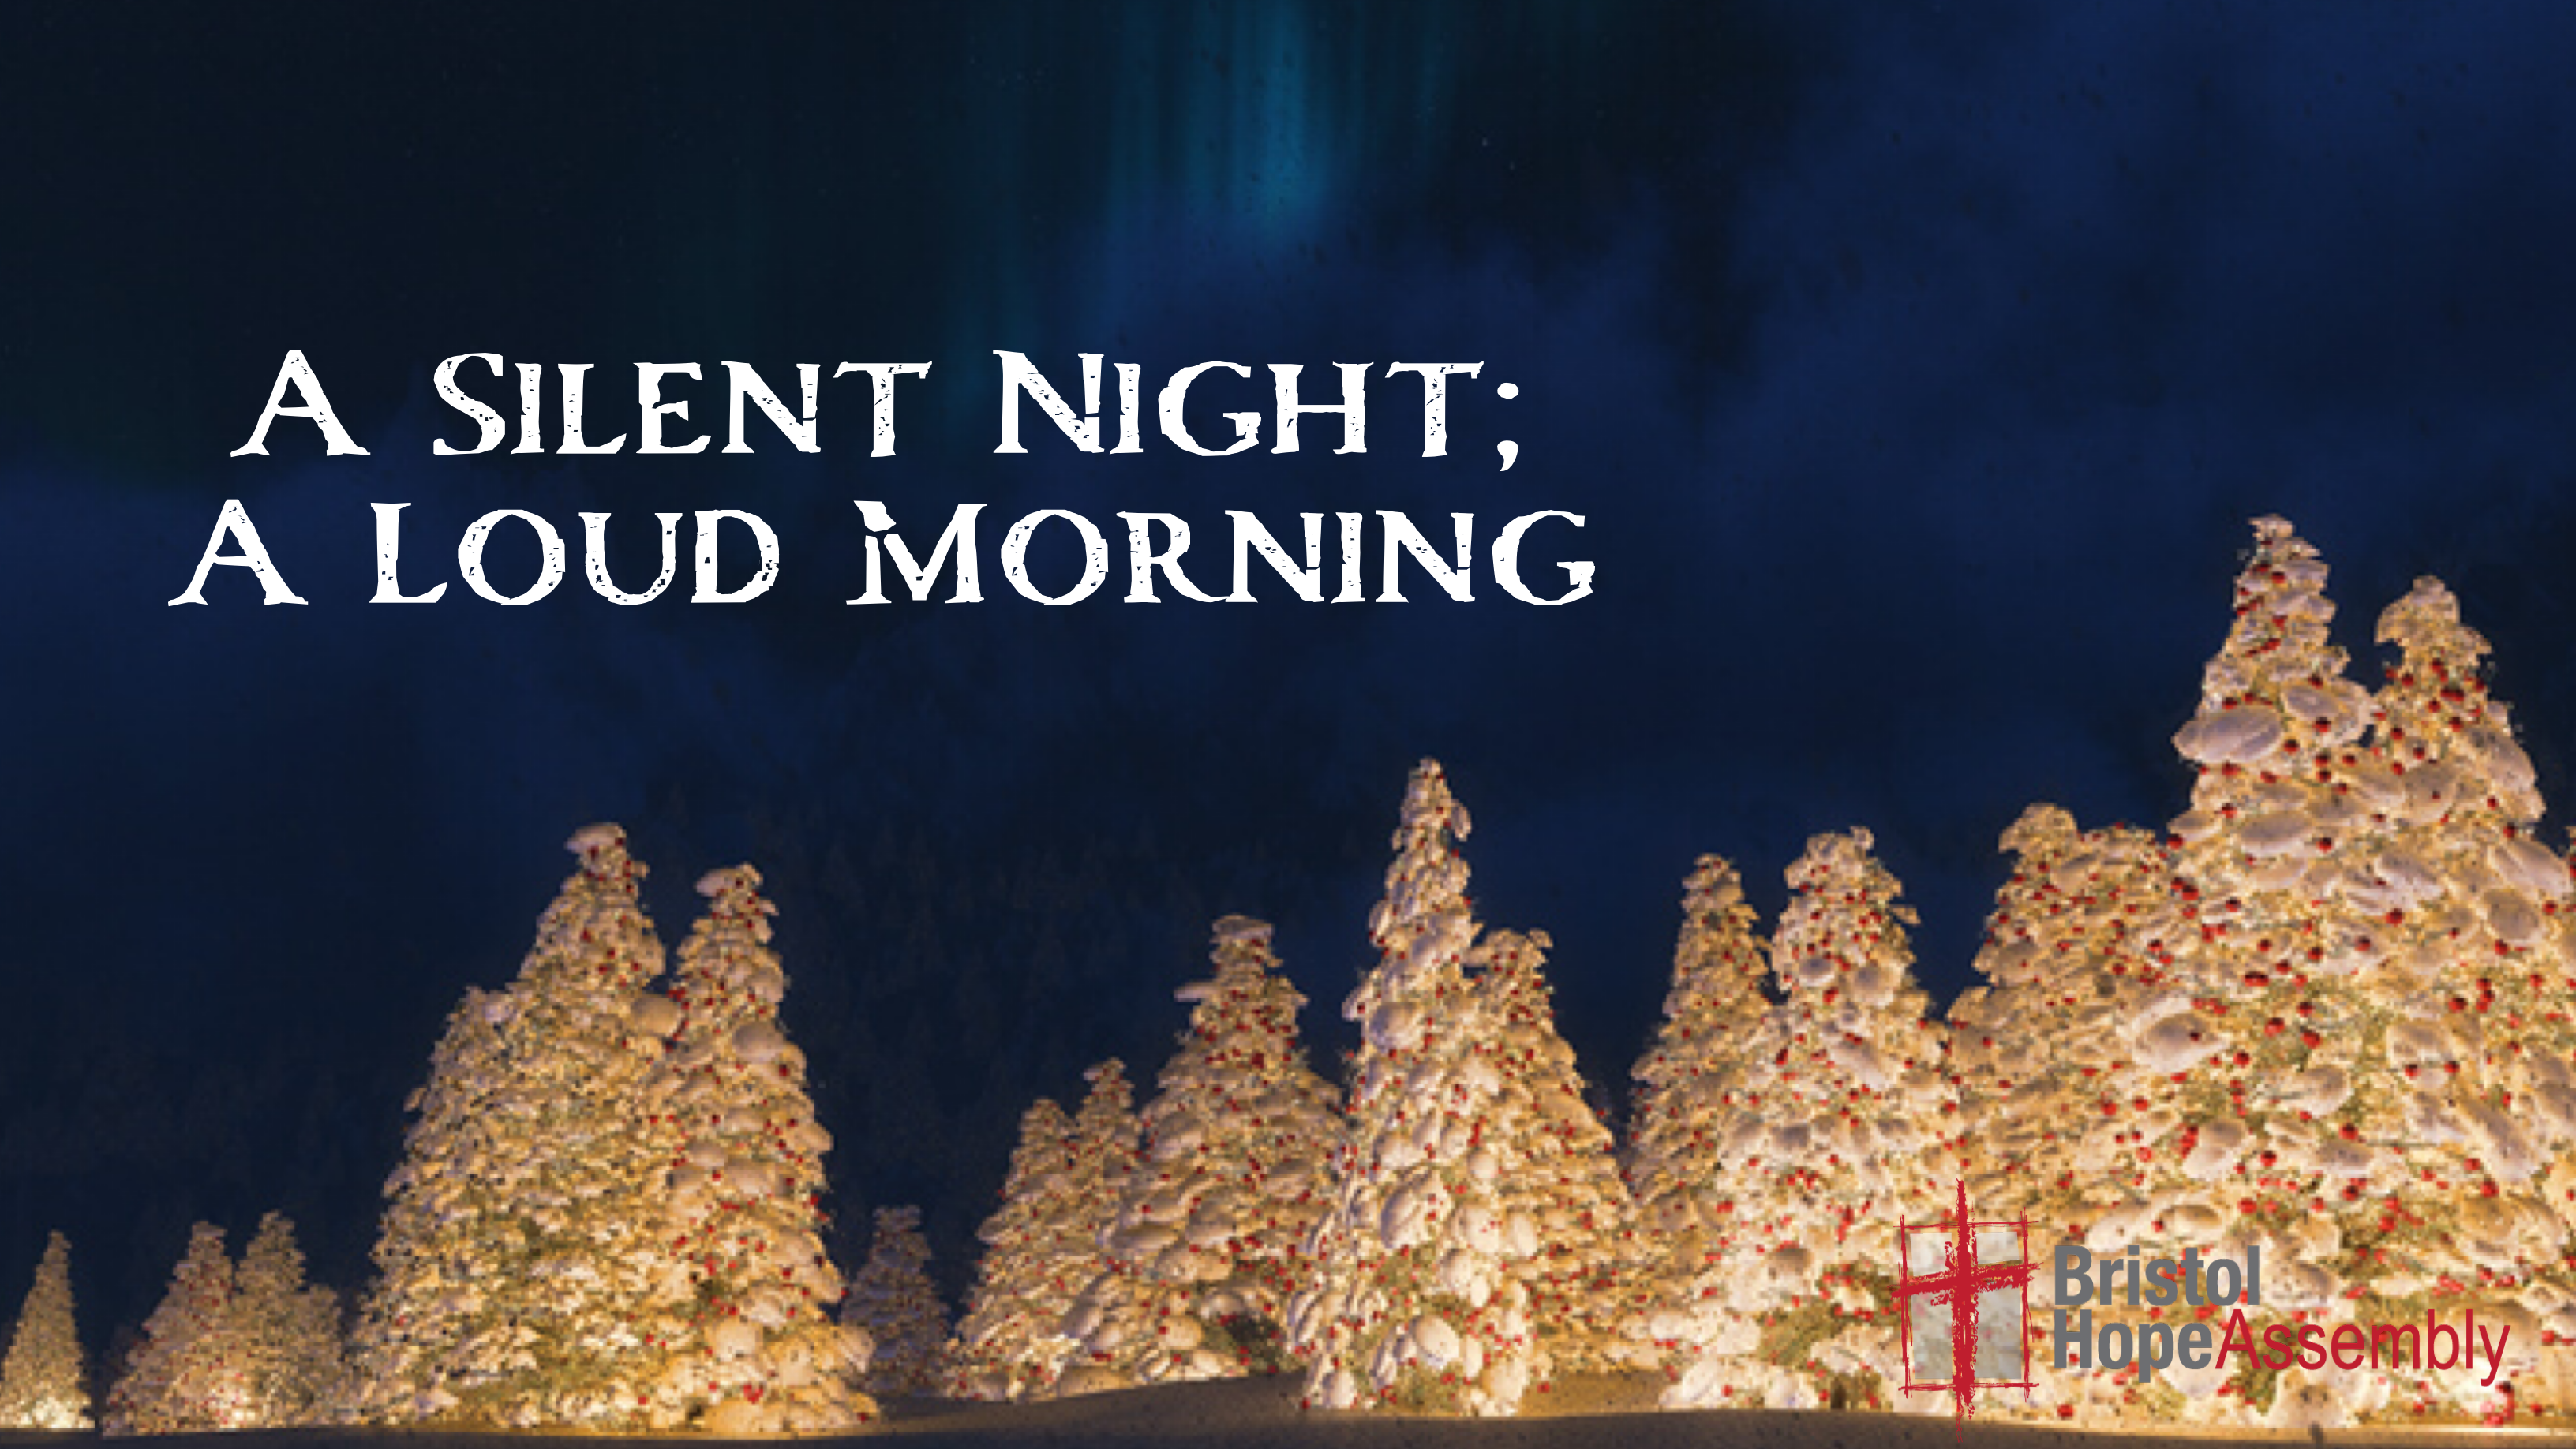 A Silent Night: A Loud Morning – Christmas Eve 2019